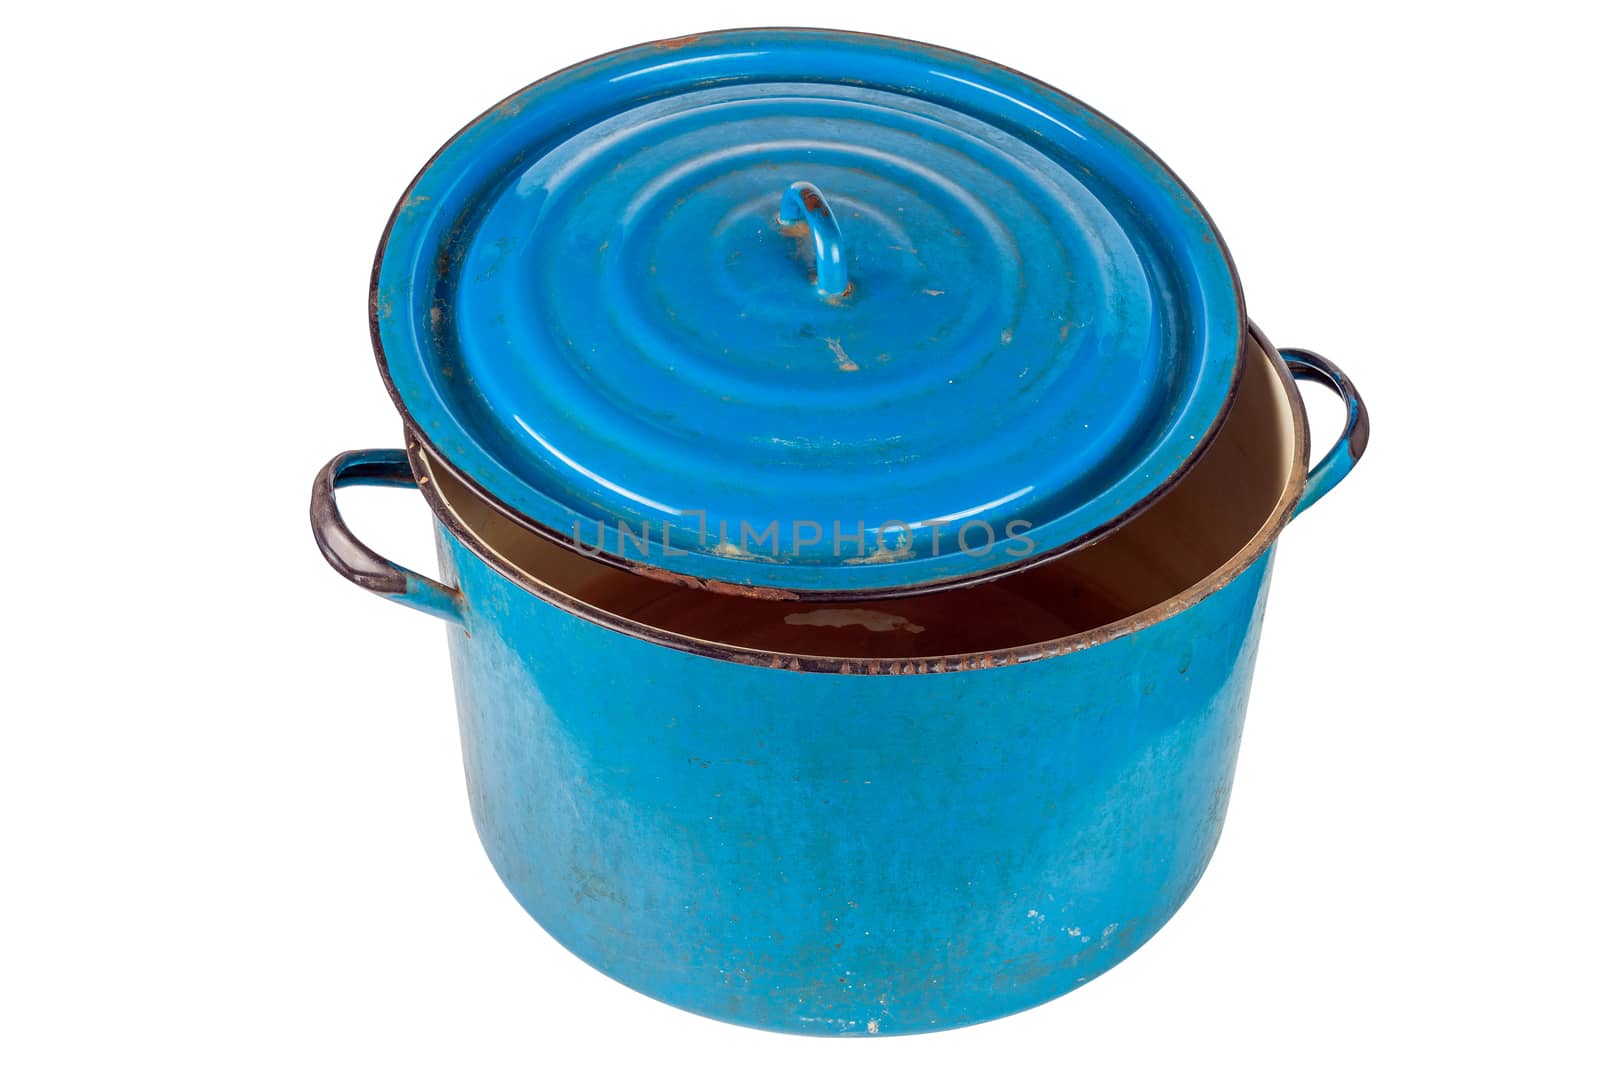 An old large ajar dirty enameled blue pot with cover isolated on white background. Used for heating water for washing in urban ghetto or in poor village. Fifty liters capacity.